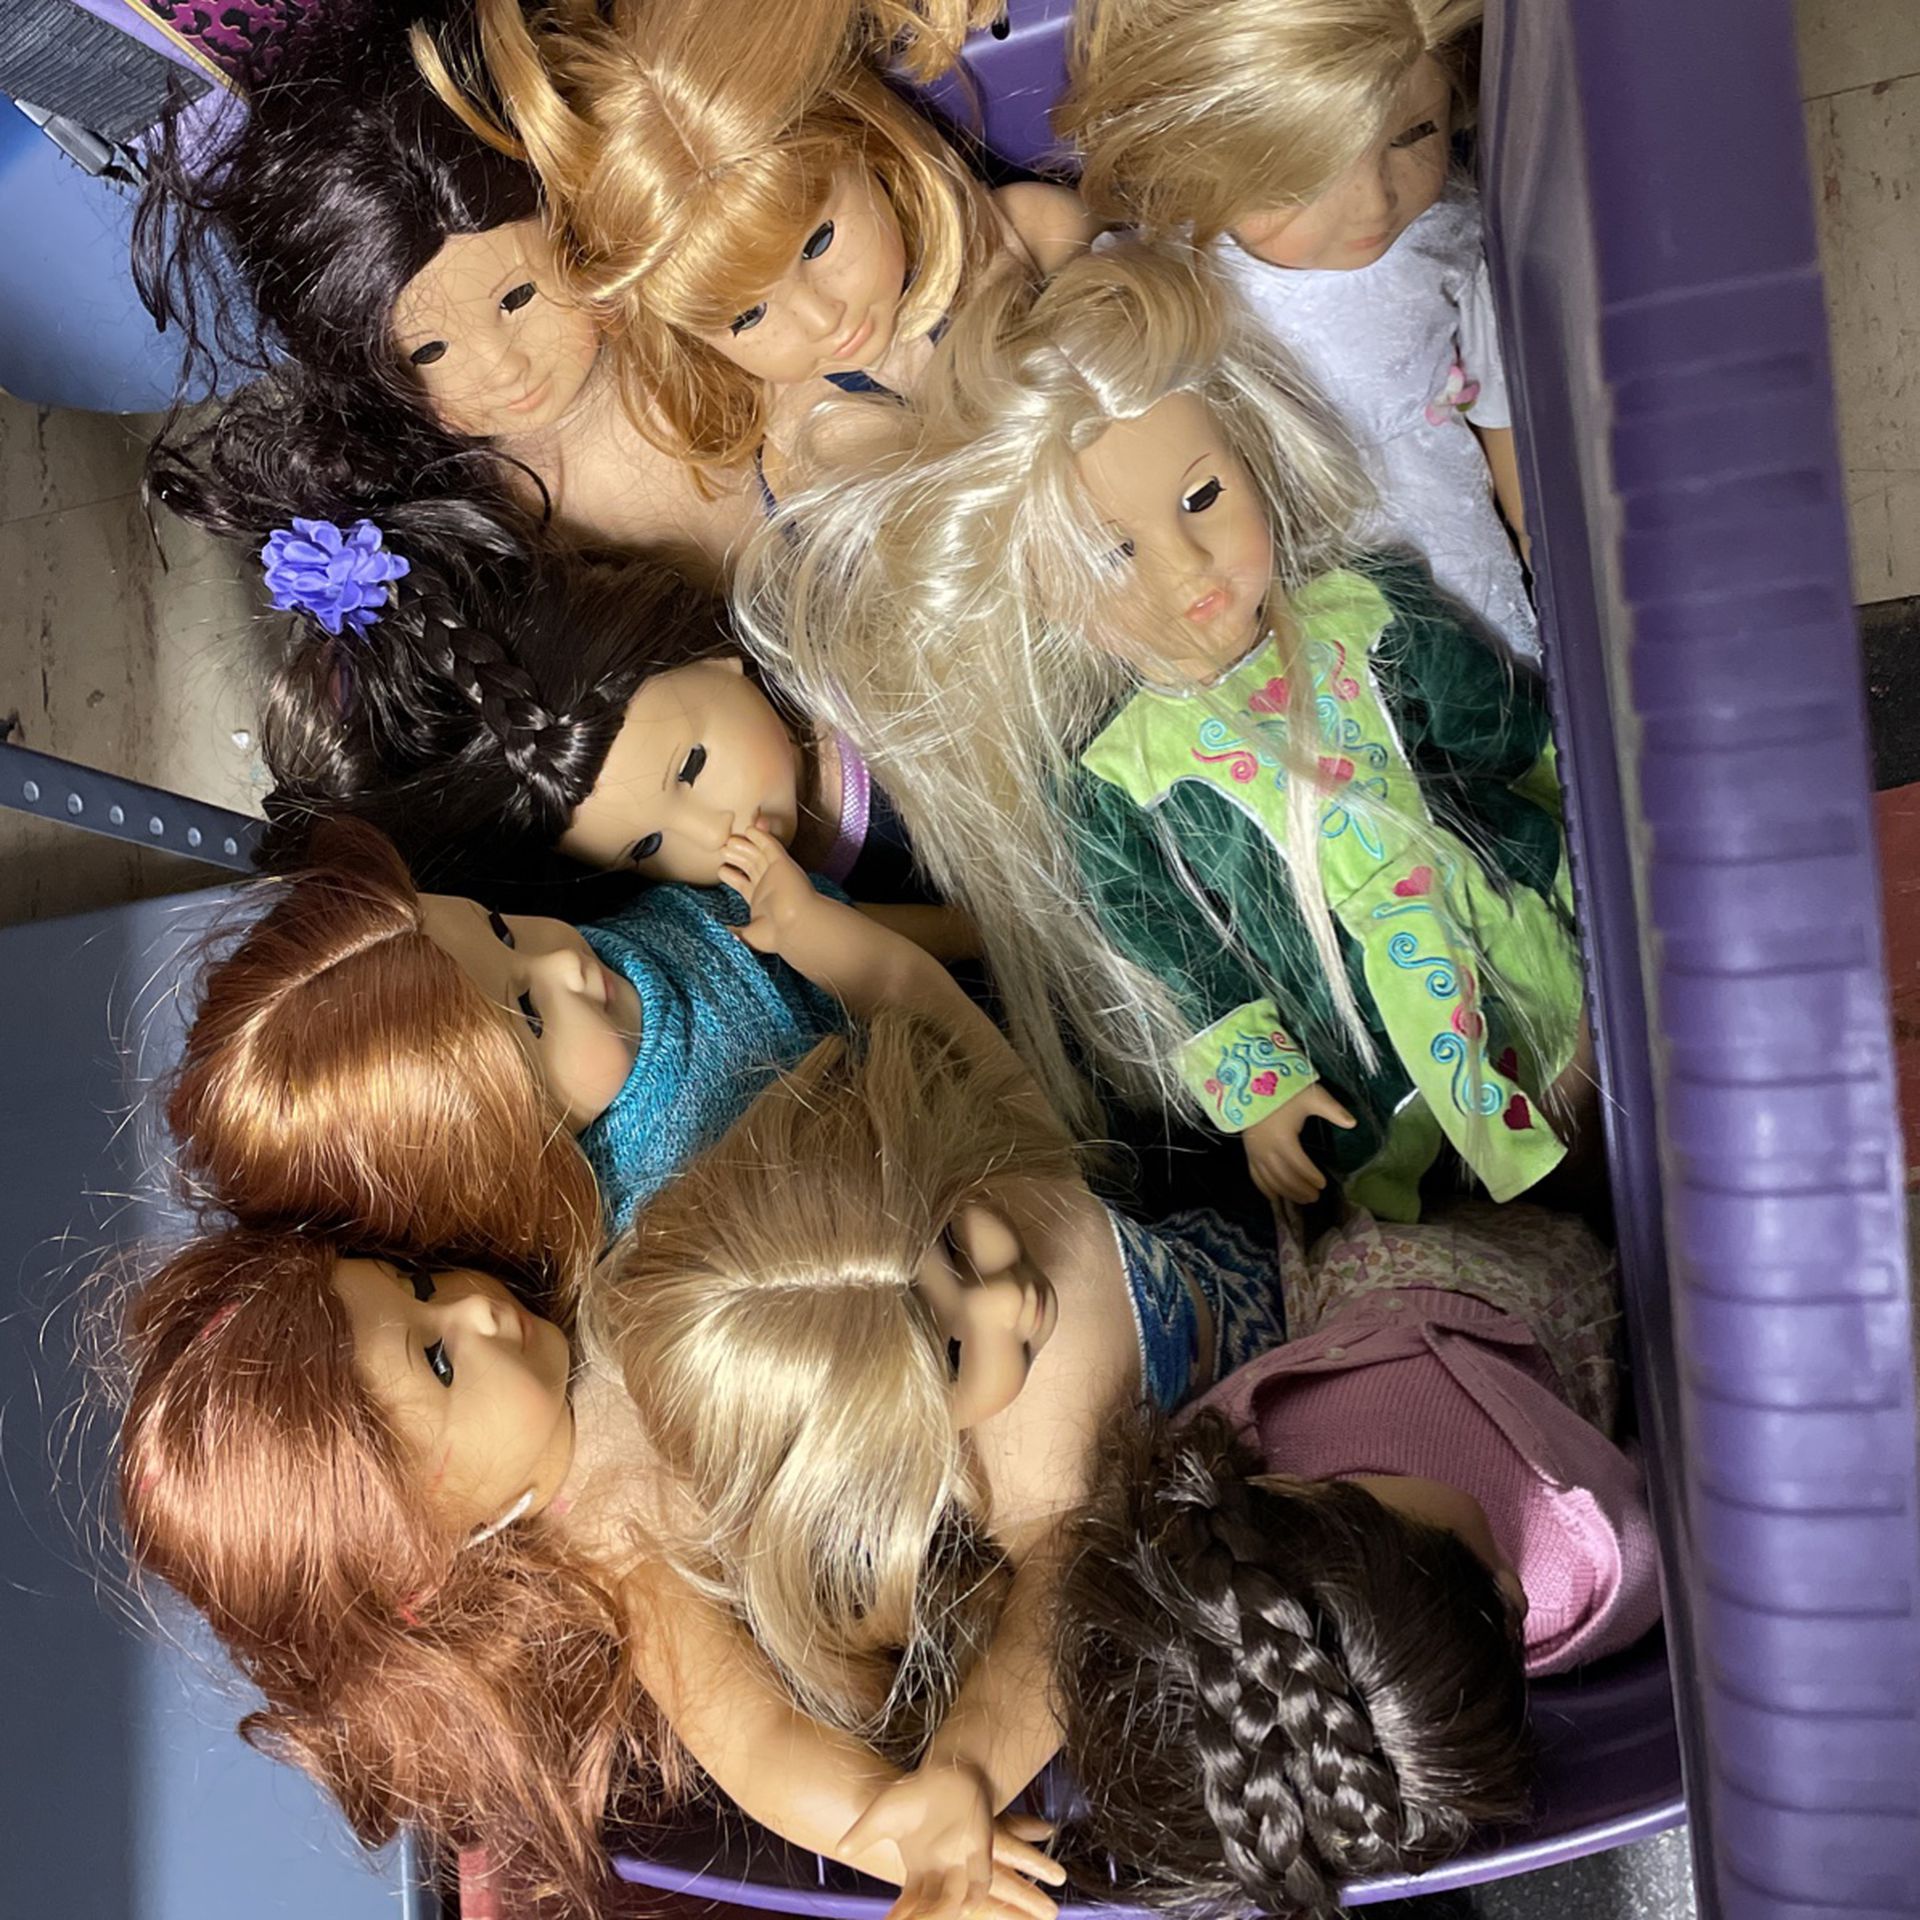 9 American Girl Dolls And A Bin Filled With Clothes Hair Chair And Wheel Chair